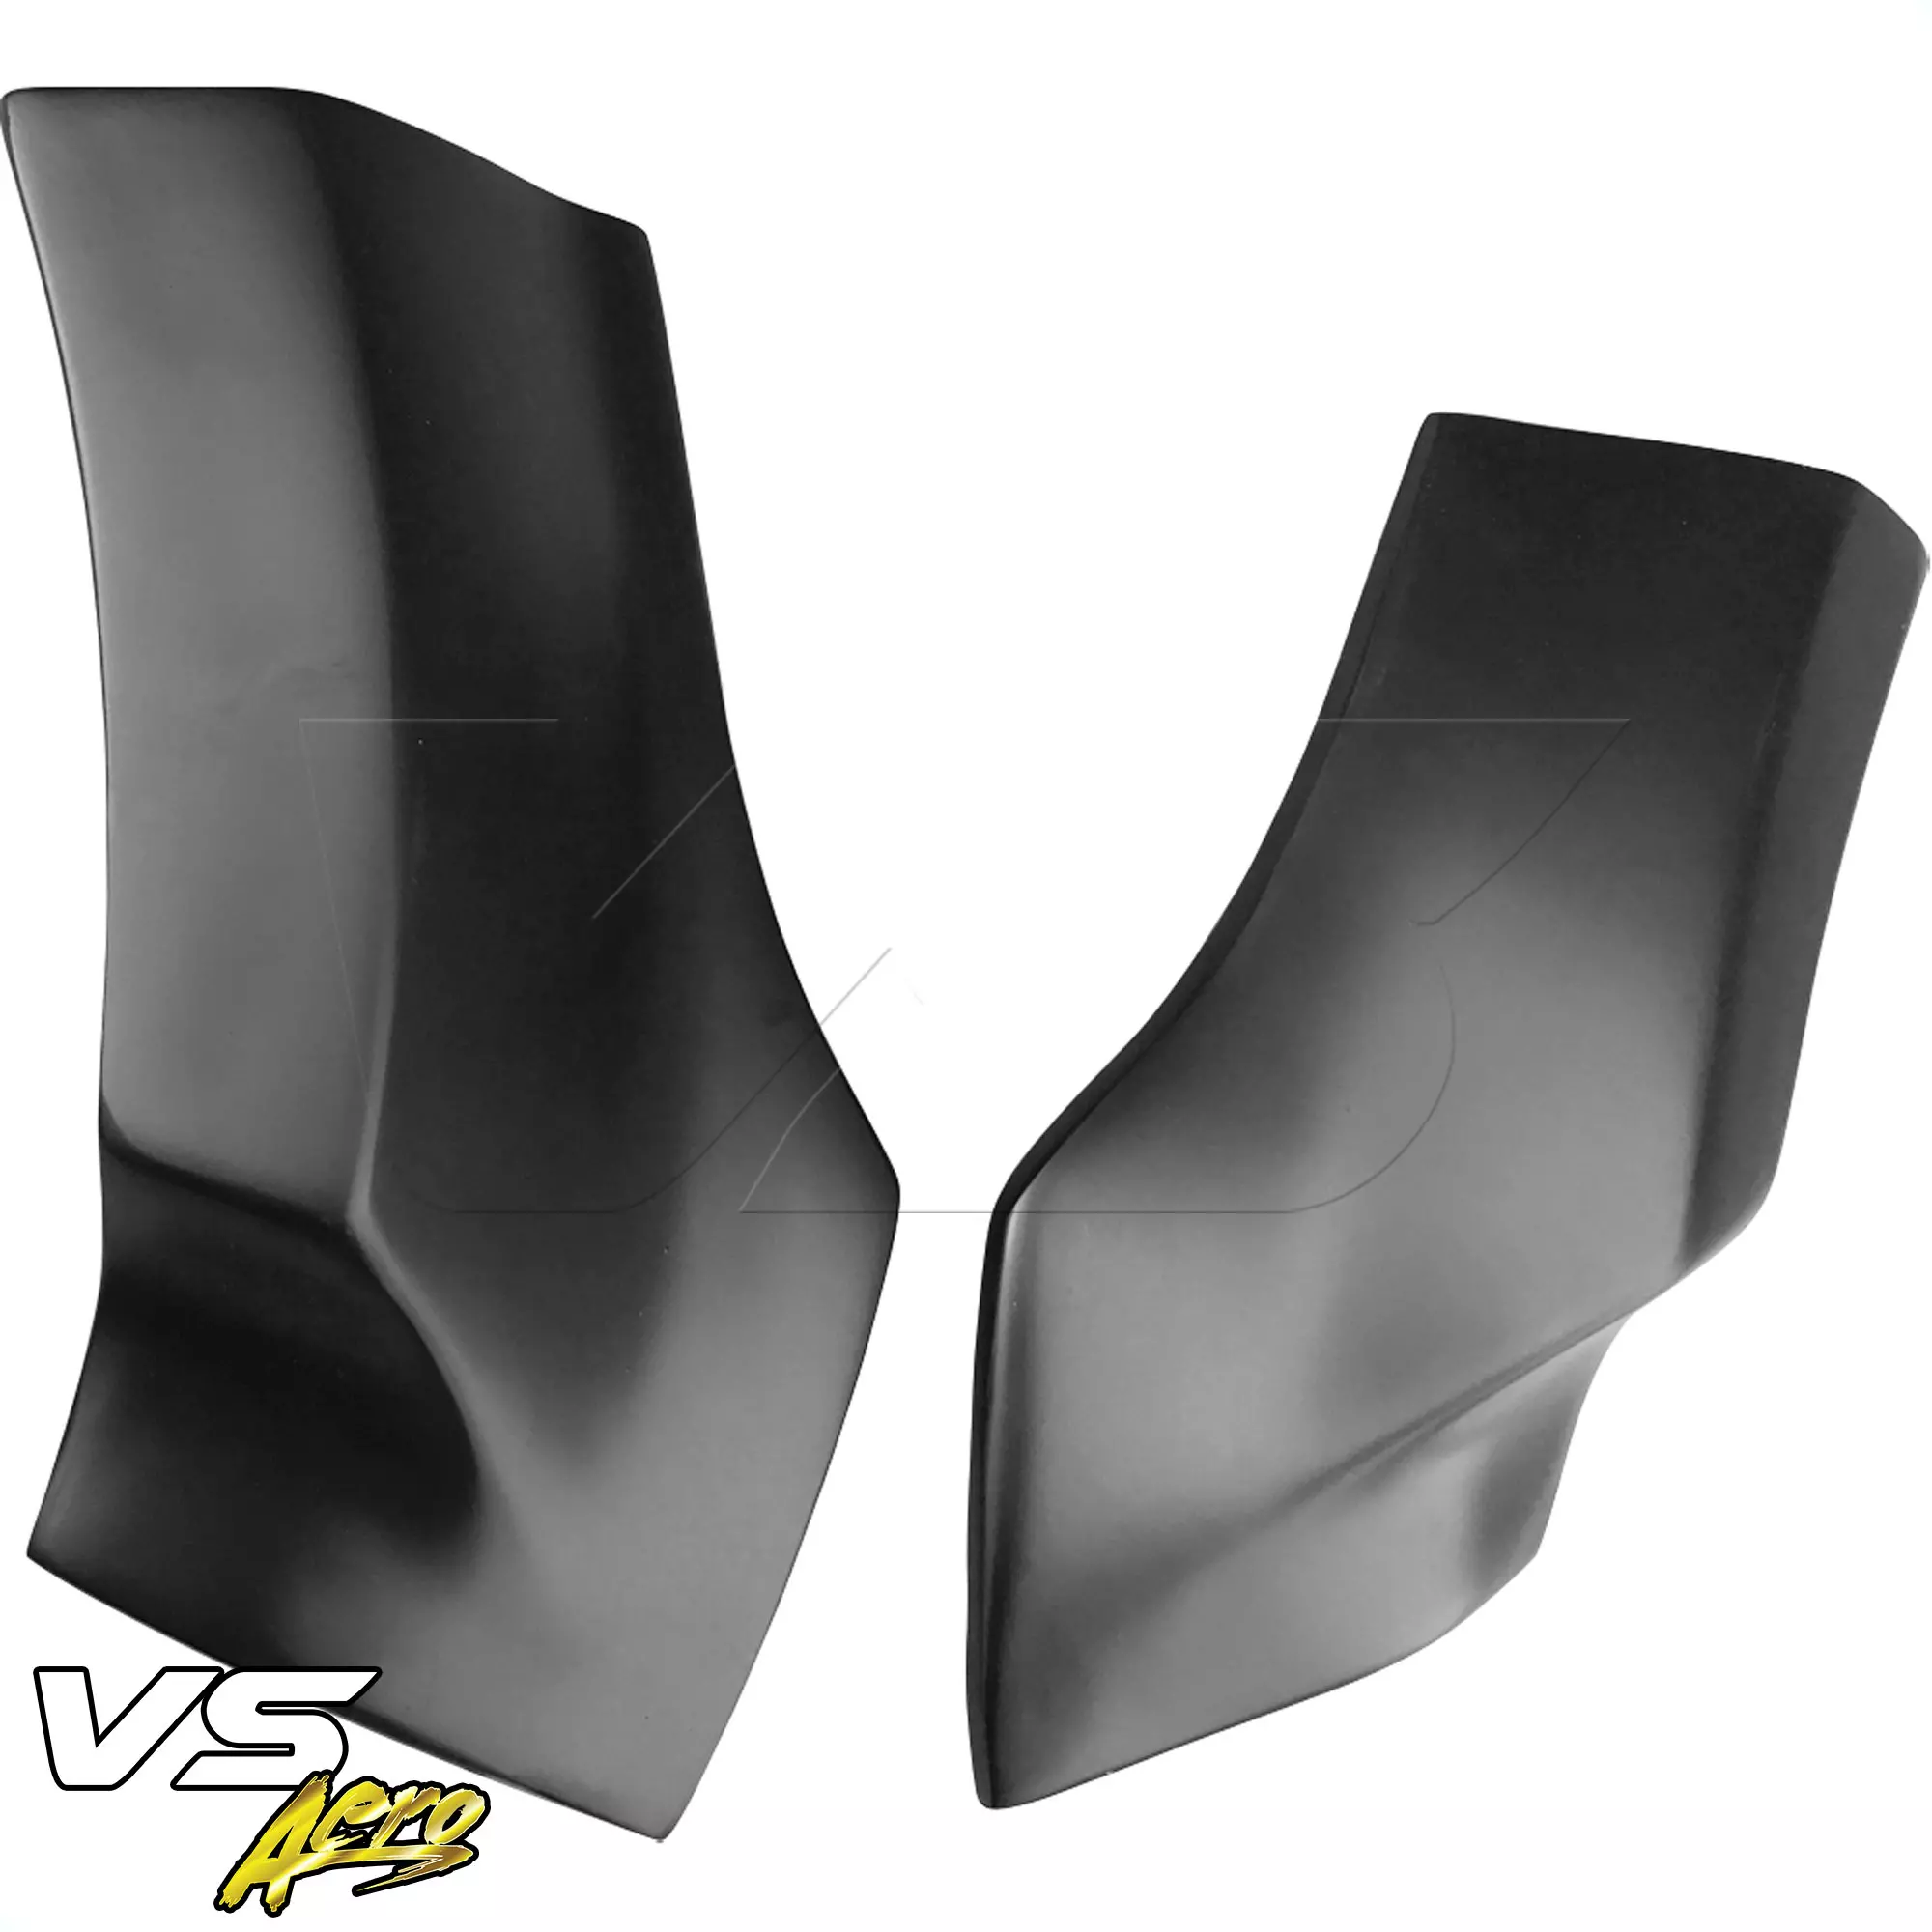 VSaero FRP KTOT Wide Body Fenders (front) > Ford Mustang 2015-2020 - Image 23